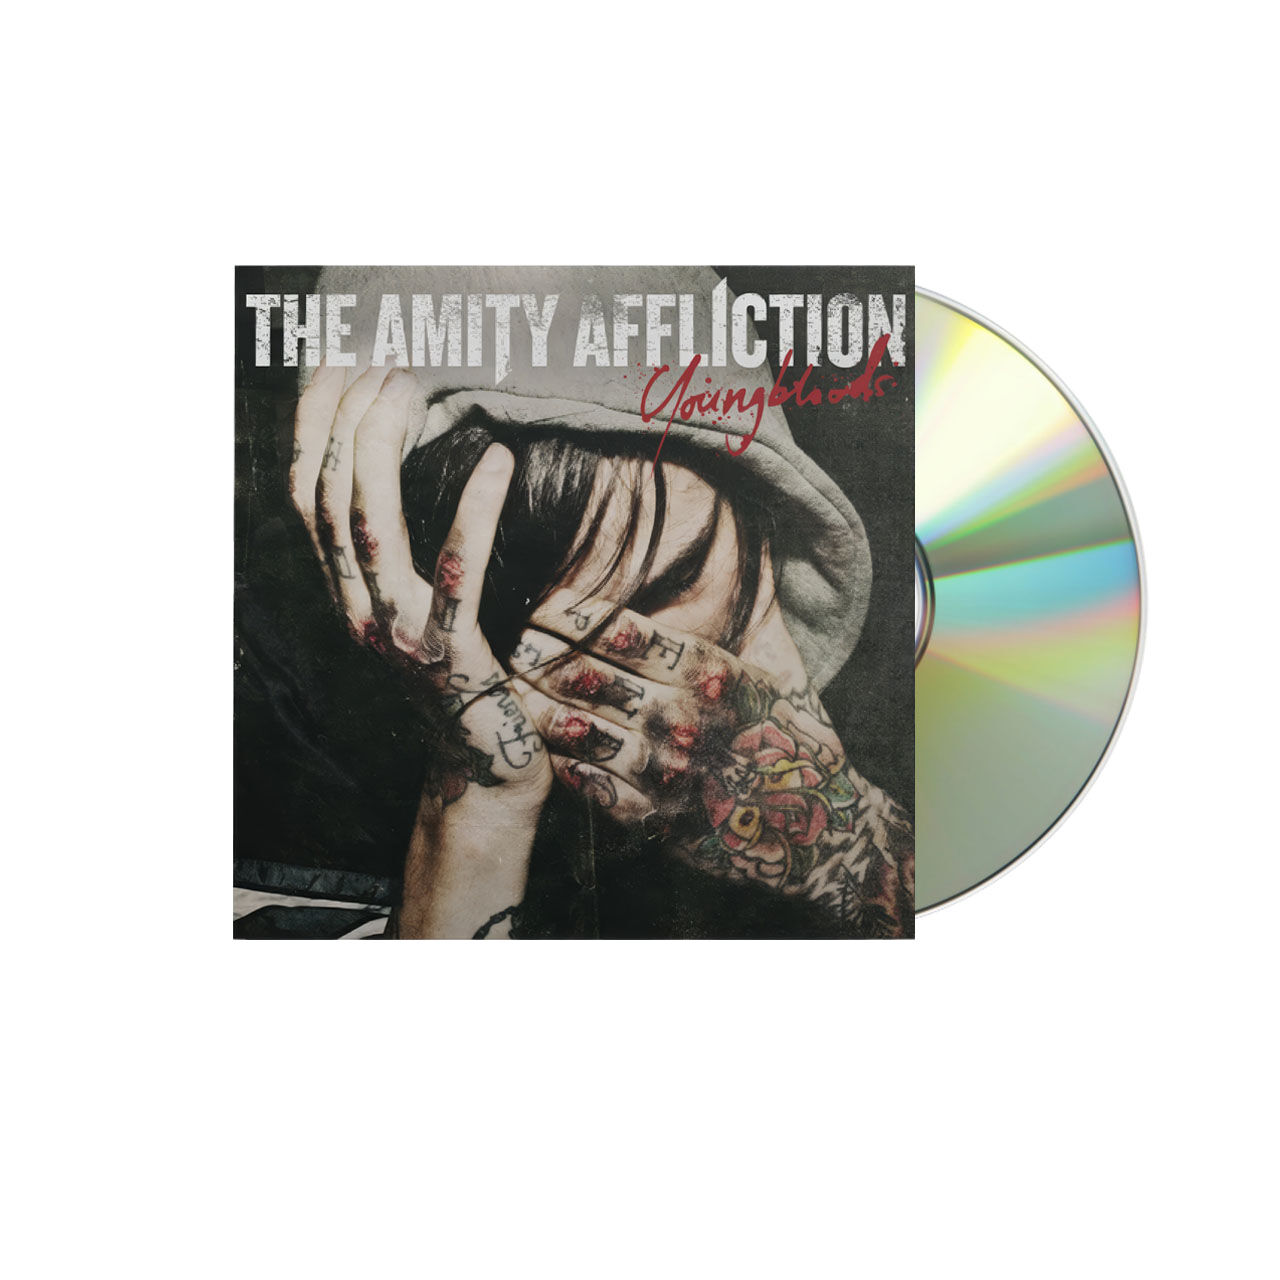 THE AMITY AFFLICTION Youngbloods Jewel Case CD